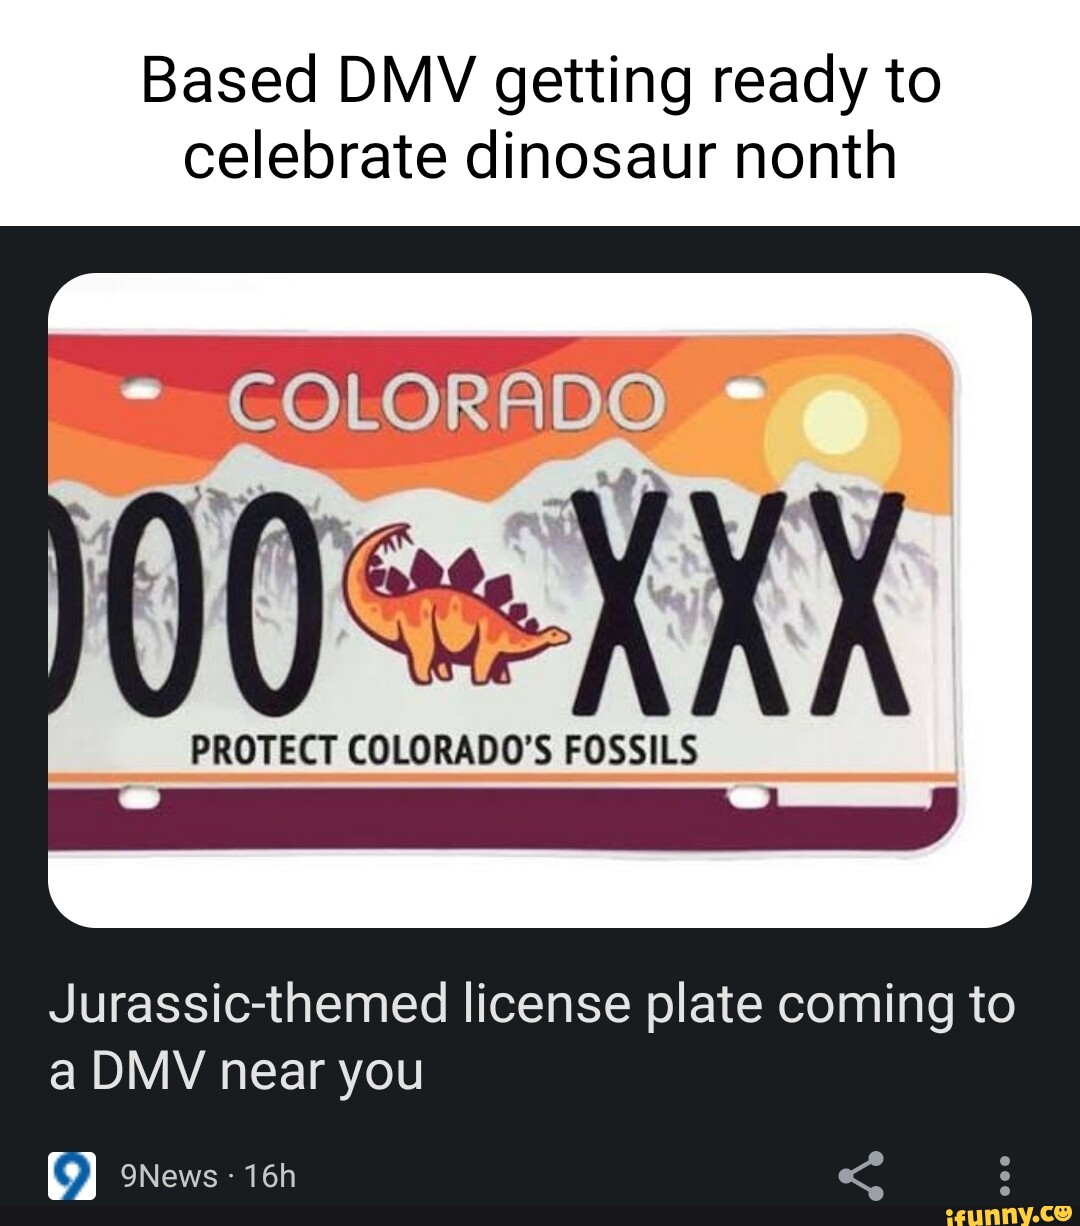 When will you be able to buy Colorado's Jurassic-themed license